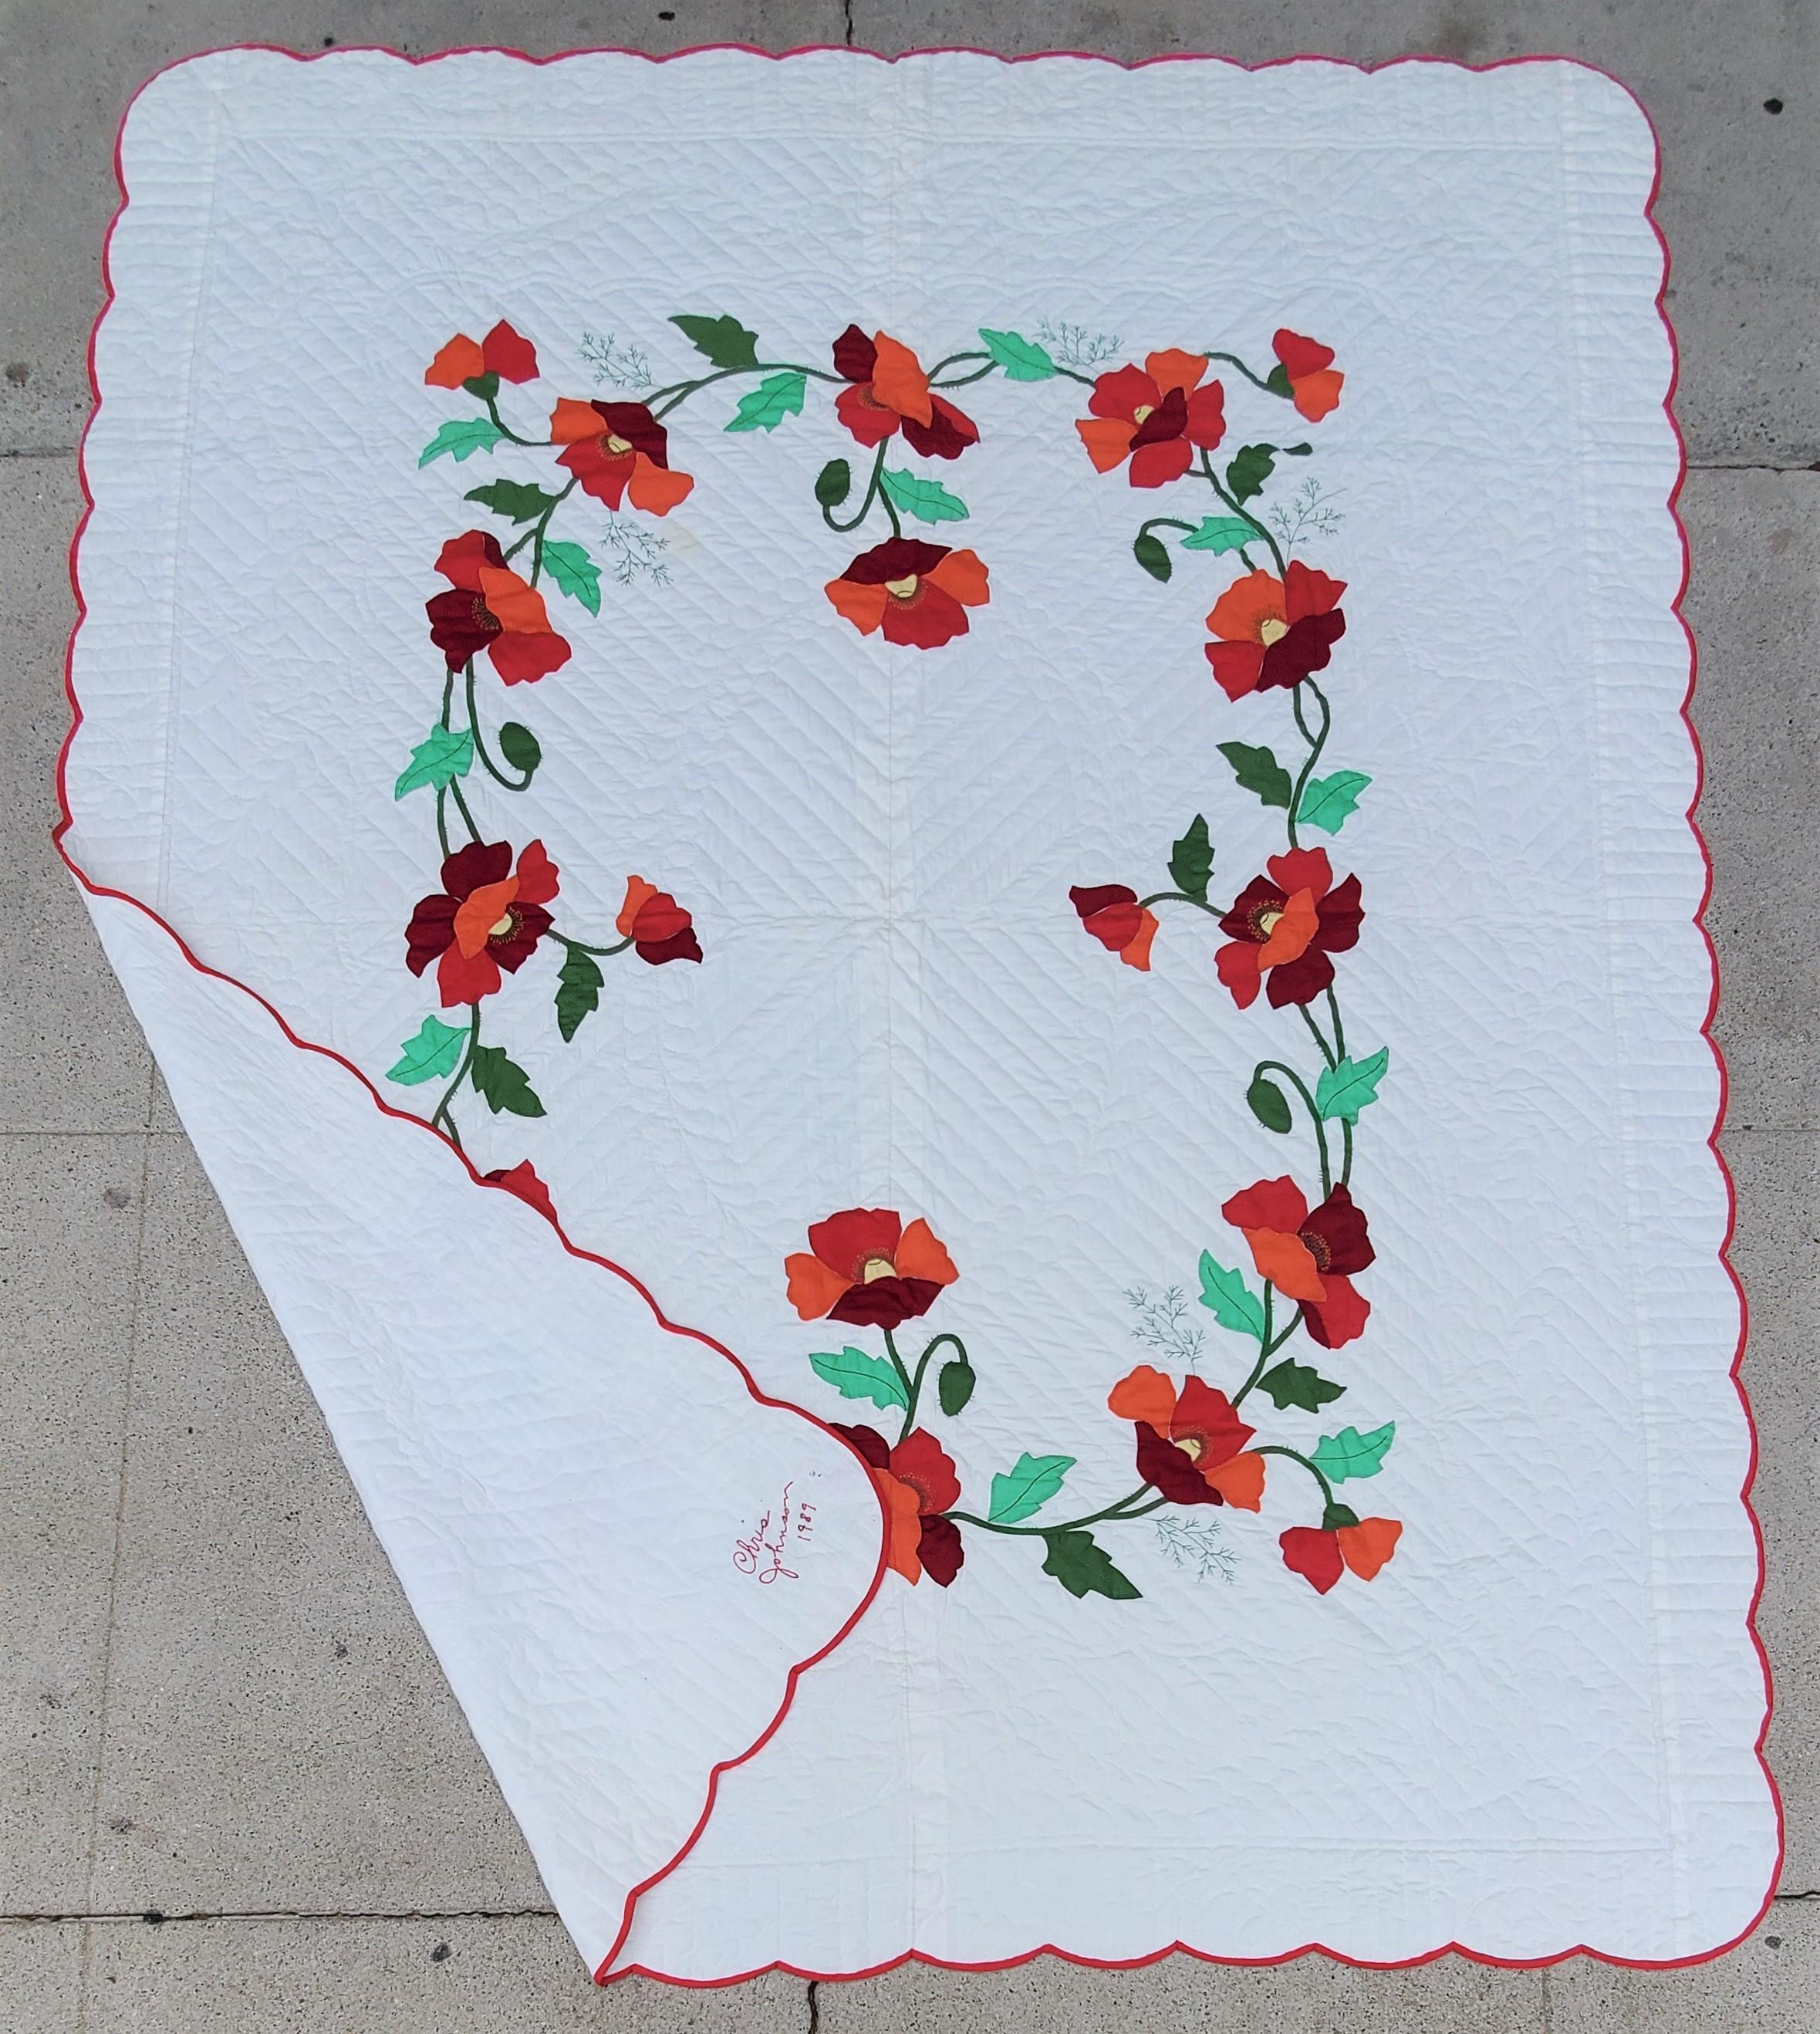 Signed and dated 1989 by Chris Johnson. Rose applique quilt with red border. The quilting has a floral and heart design which are shown in the images. Great applique quilt for any collection.